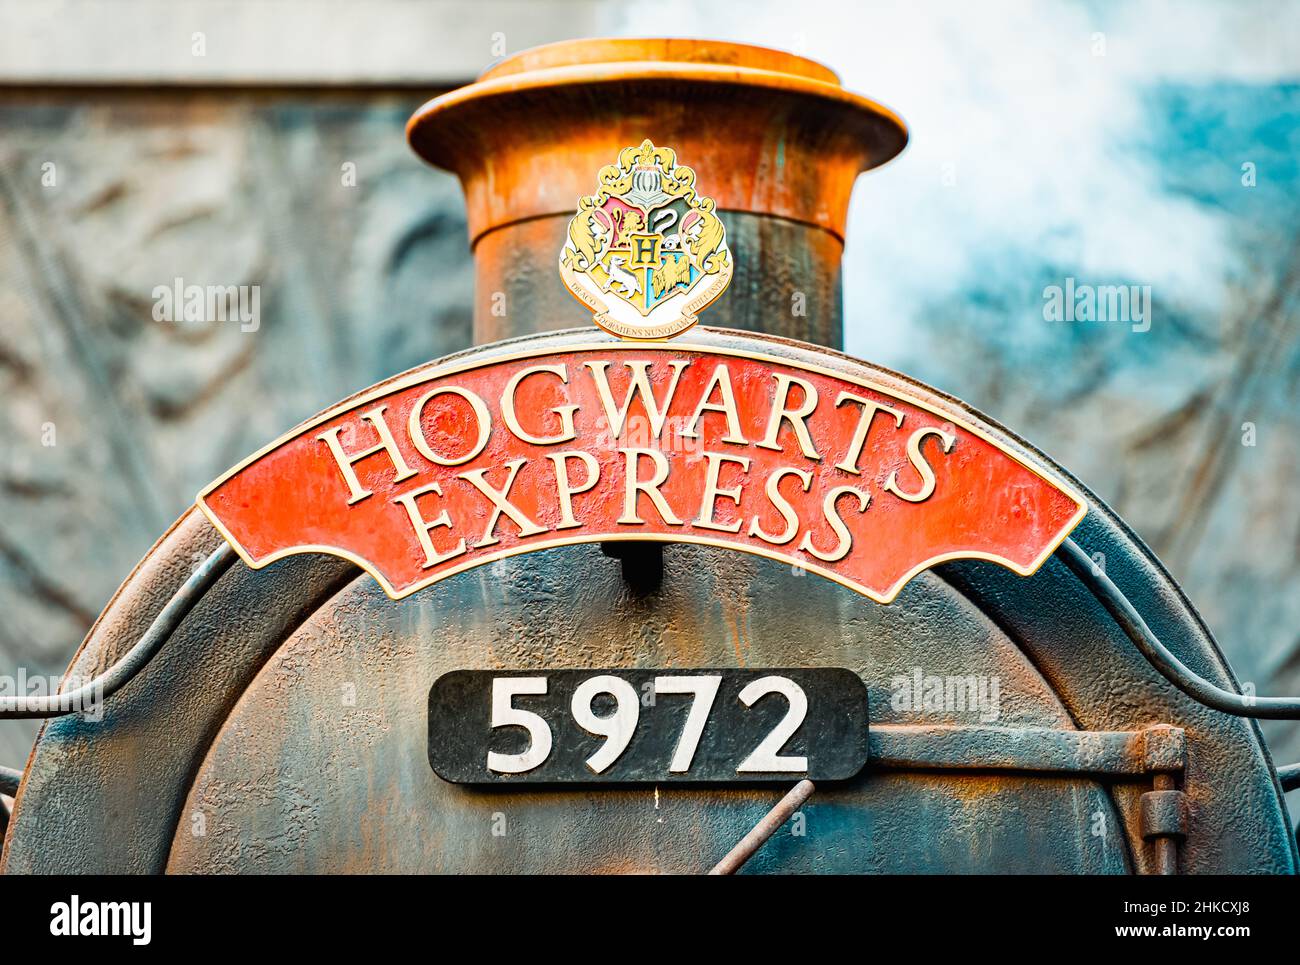 Los Angeles, United States of America - October 17, 2016: hogwarts express train from Harry Potter books and movies in theme park Universal Studios. Stock Photo